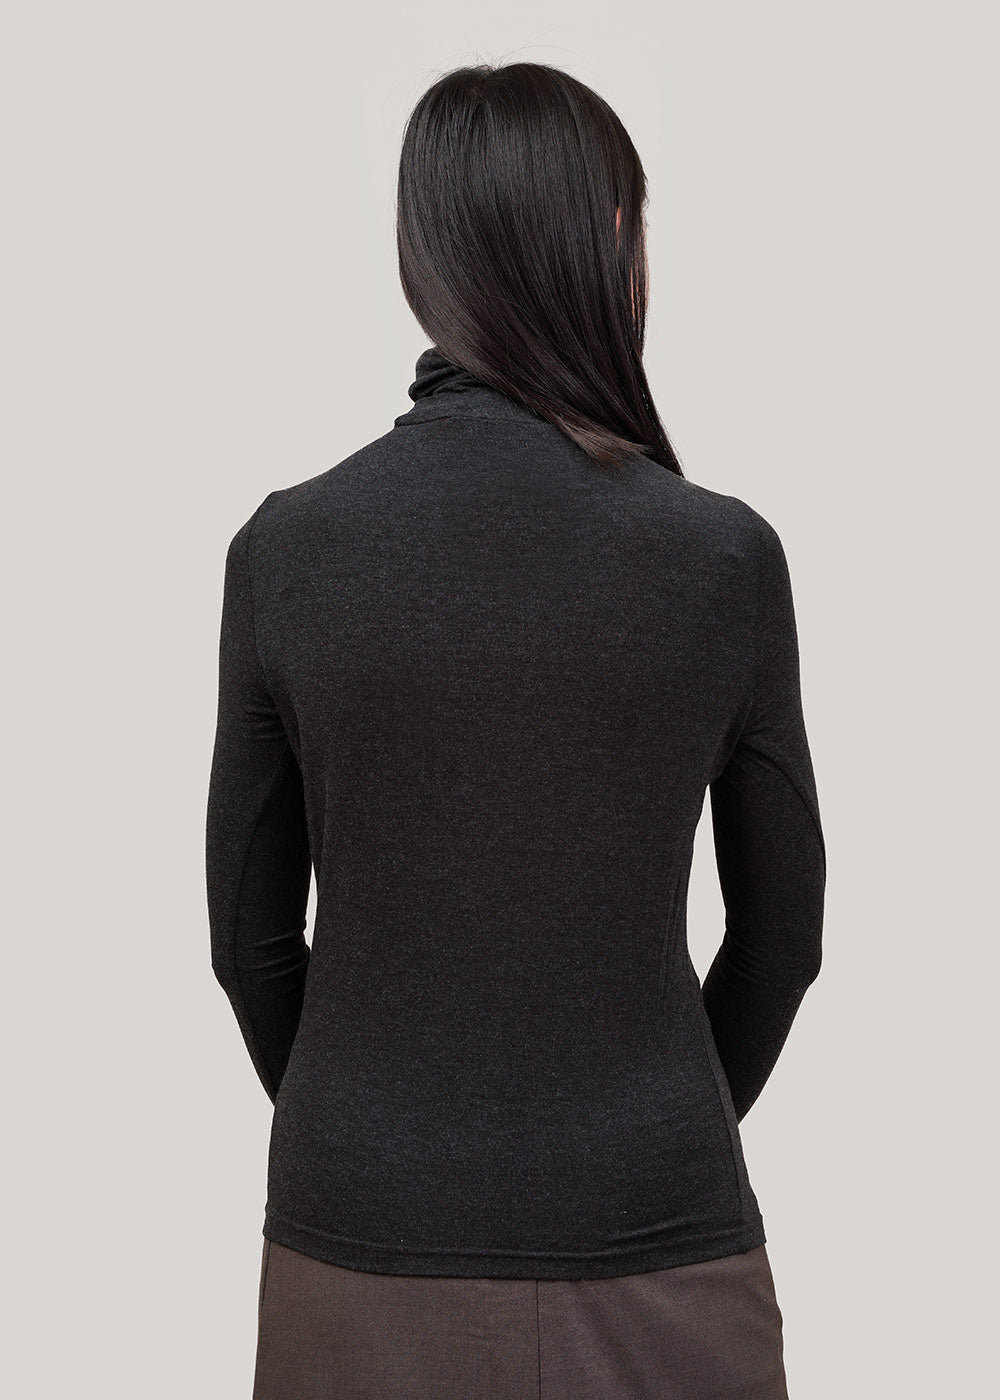 Mijeong Park Black Roll Neck Jersey Top - New Classics Studios Sustainable Ethical Fashion Canada